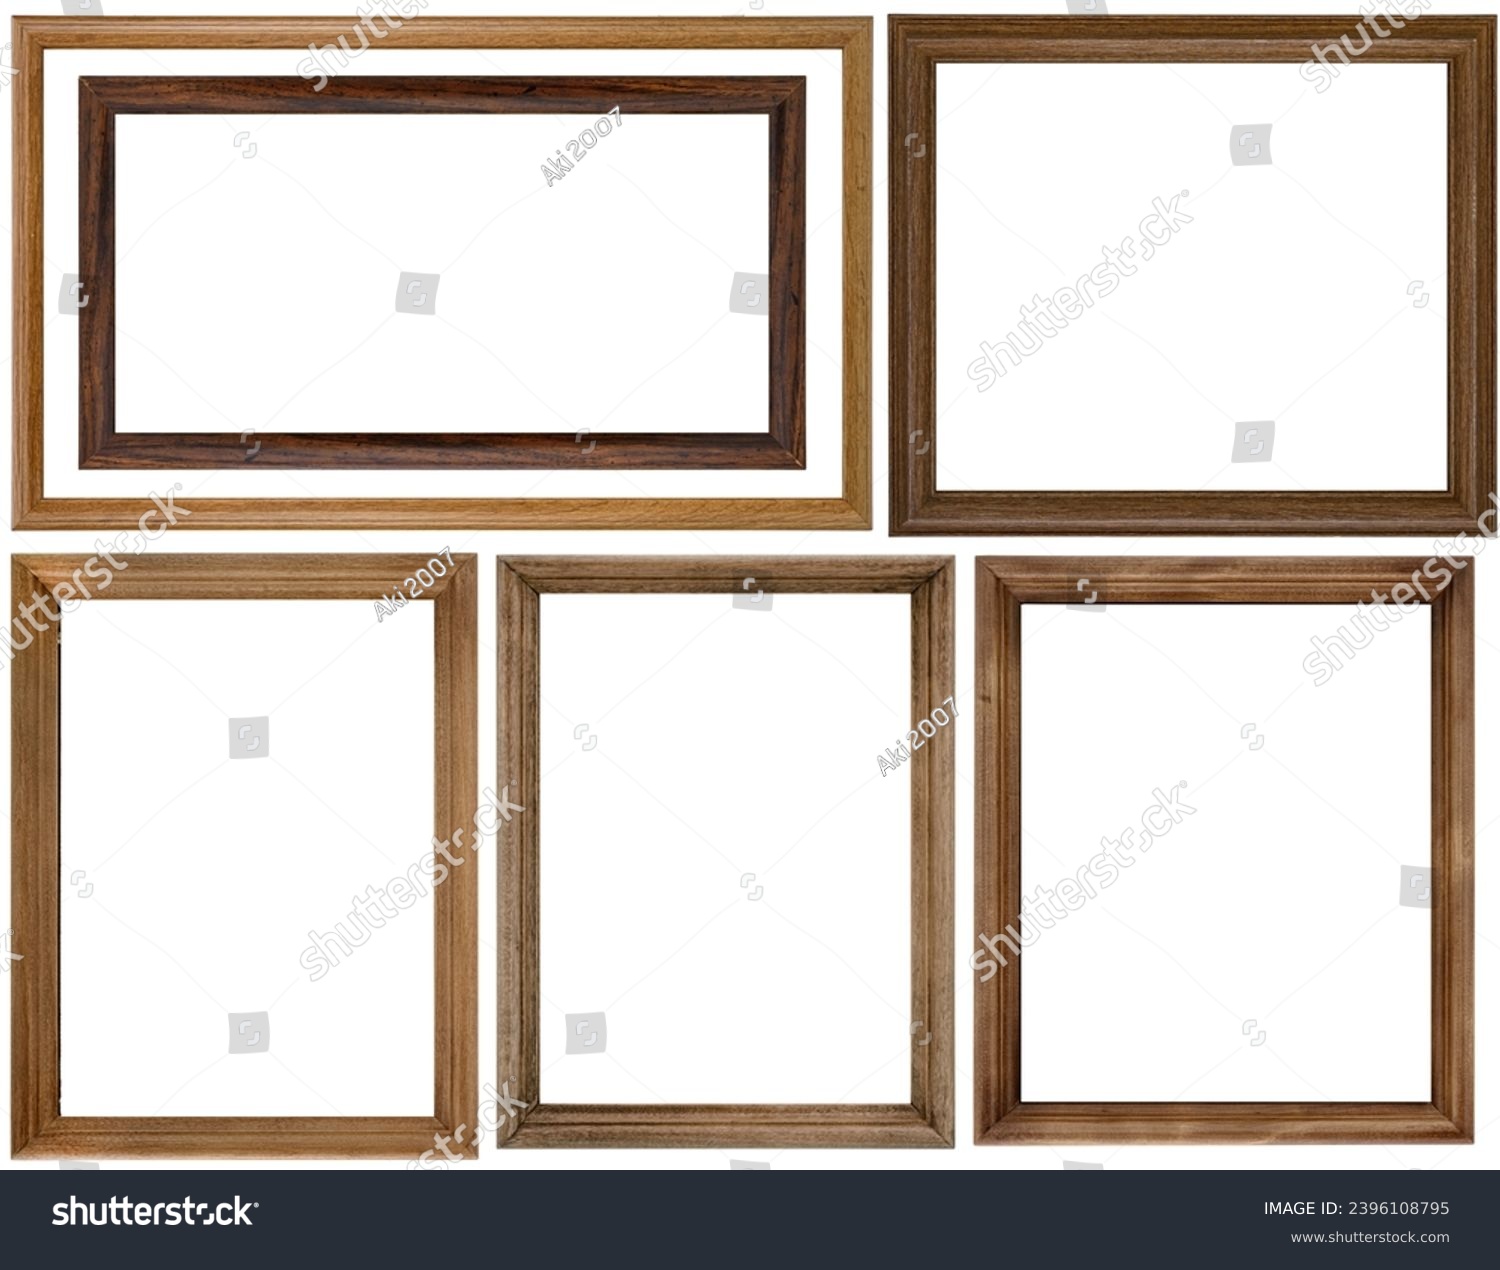 Set Classic Old Vintage Wooden mockup canvas frames isolated on white background. Blank Beautiful and diverse subject moulding baguette. Design element. use for framing paintings, mirrors or photo. #2396108795